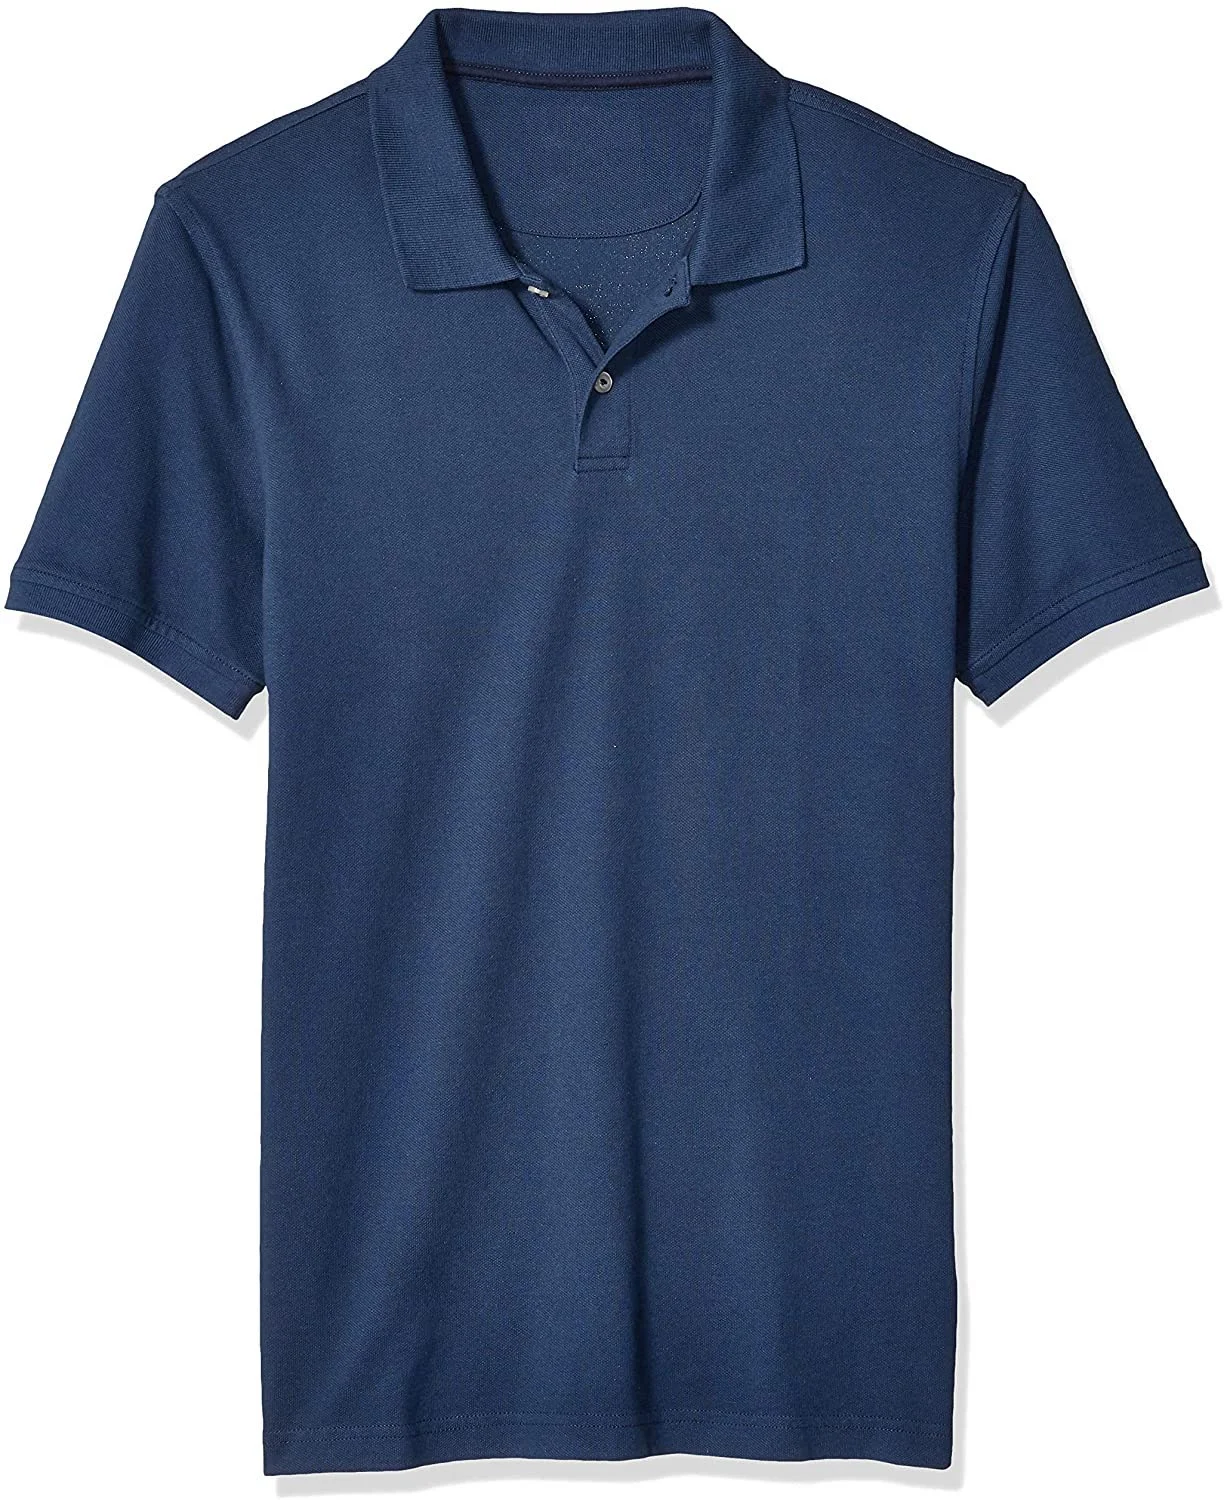 Lacoste Polo Shirts - Bangladesh Factory, Suppliers, Manufacturers